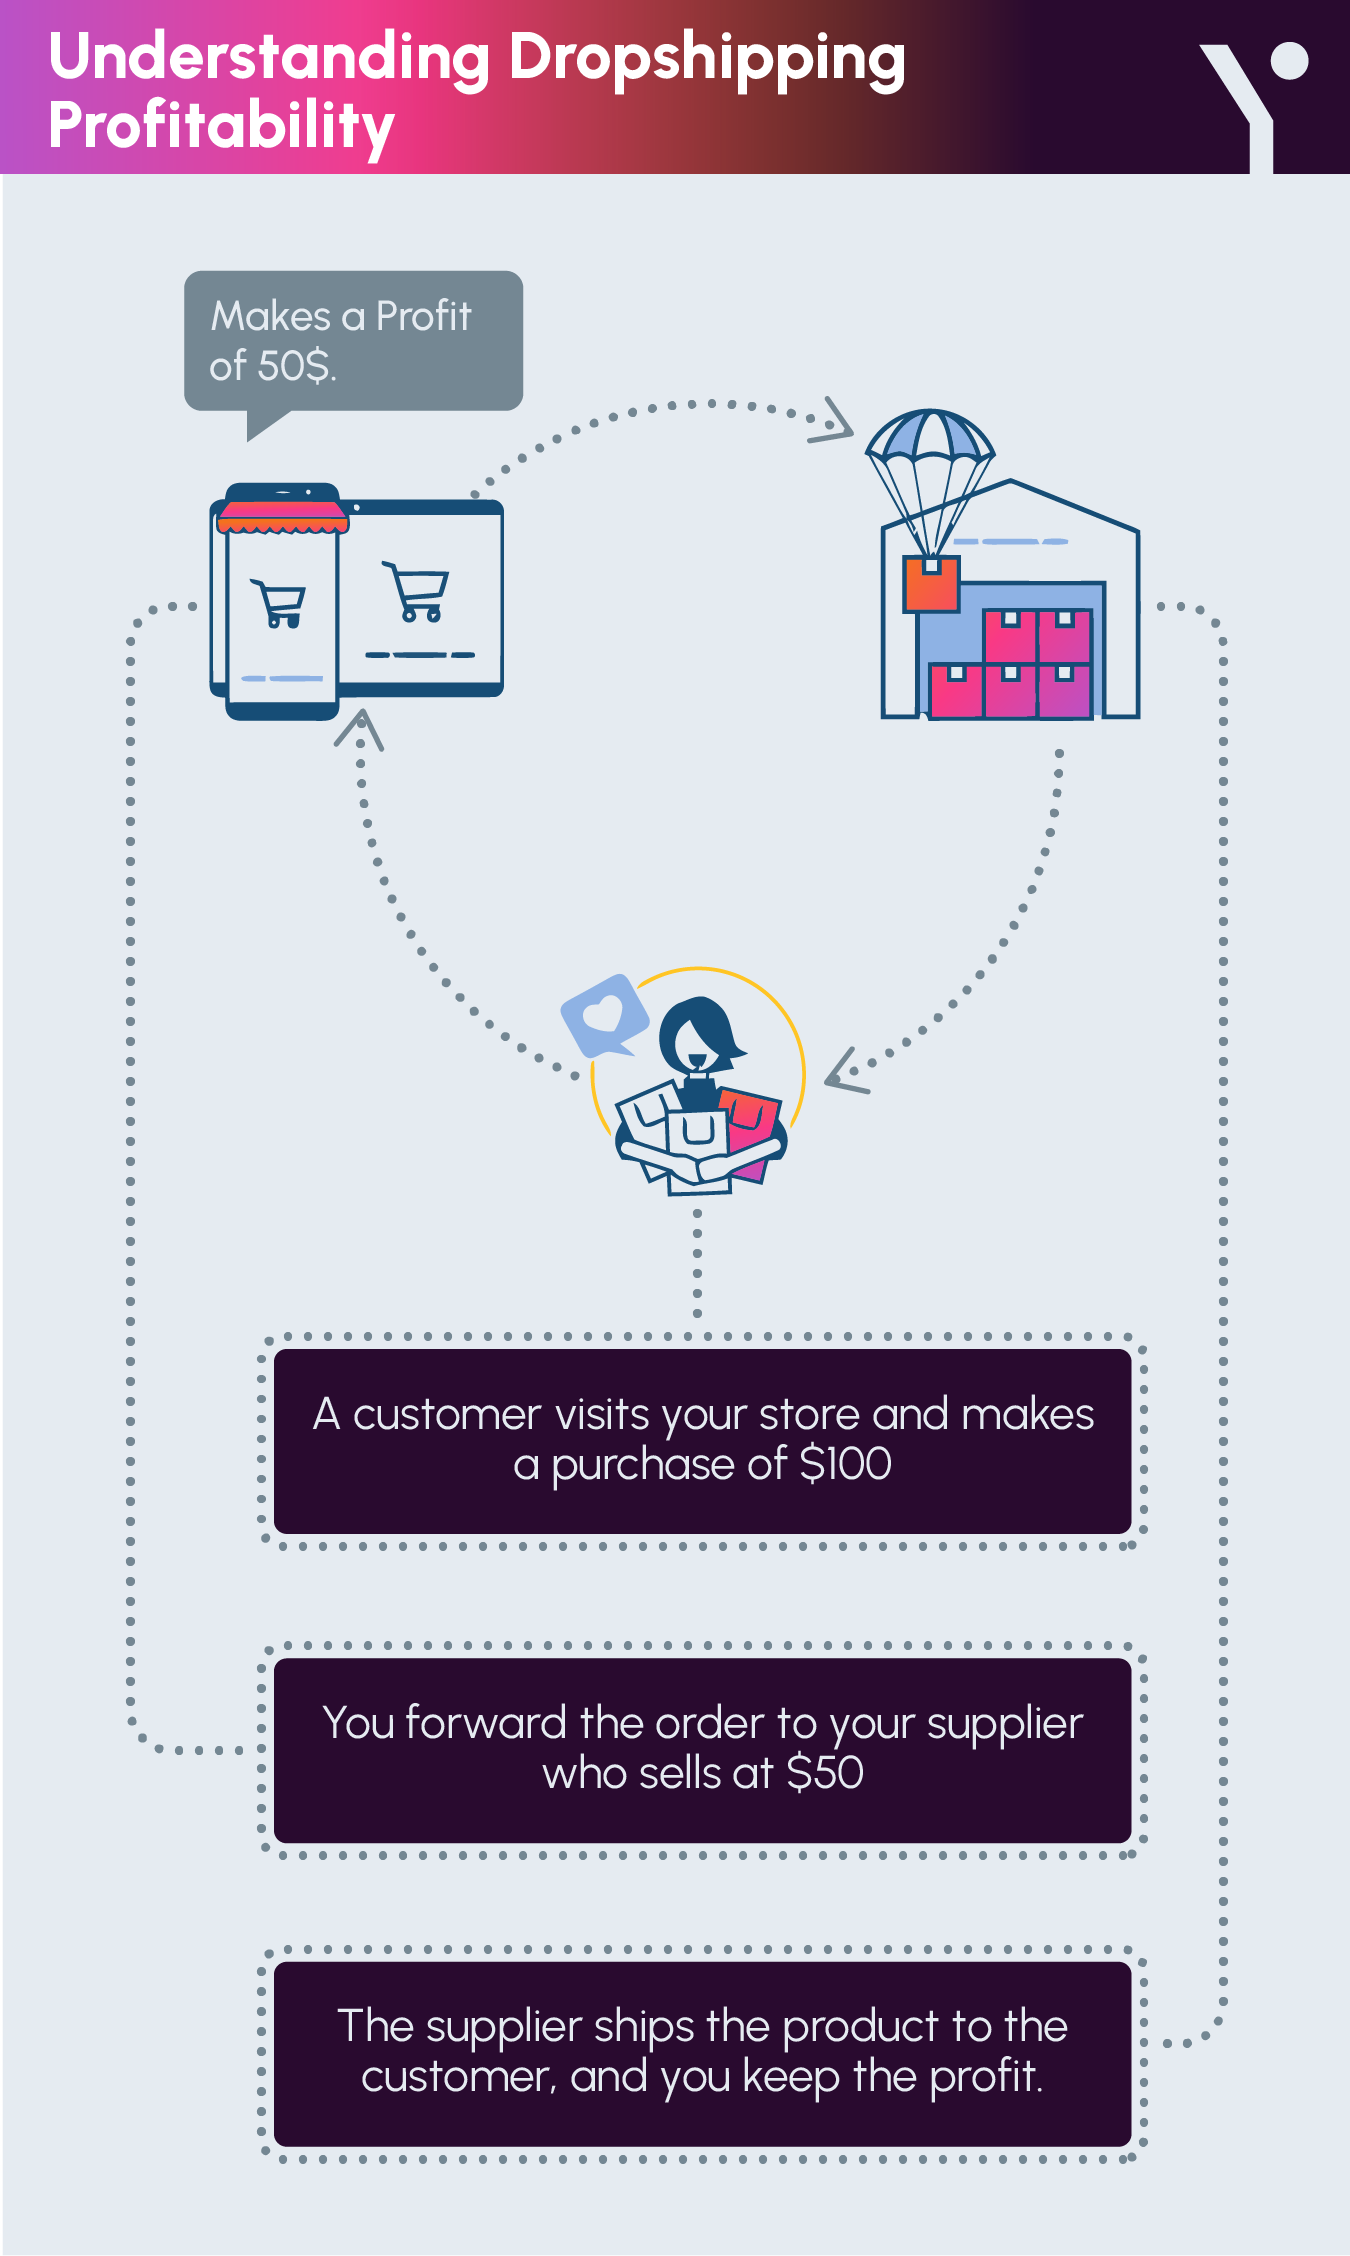 Key pointers of Analyzing the Profitability of Dropshipping in infographic form